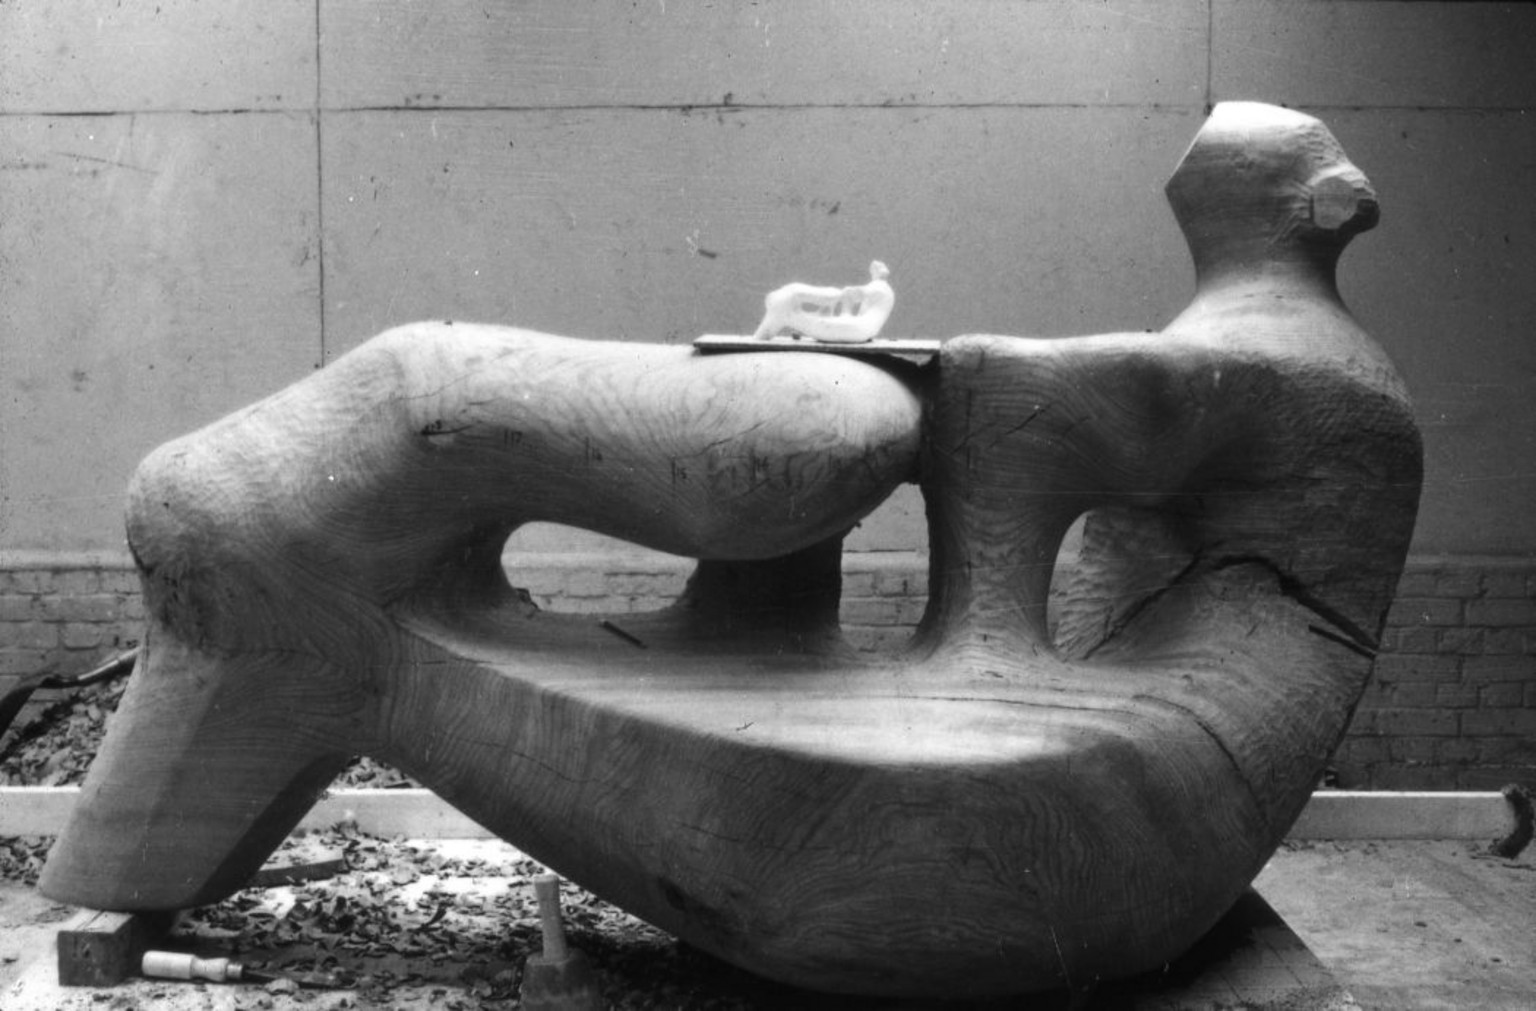 Sculptural Compton, \'\'An (Henry kind | of Henry essentially Public Moore\'s Moore: Identity) Ann Tate rhythm\': different in Sculpture Process Rediscovering and Wood\'